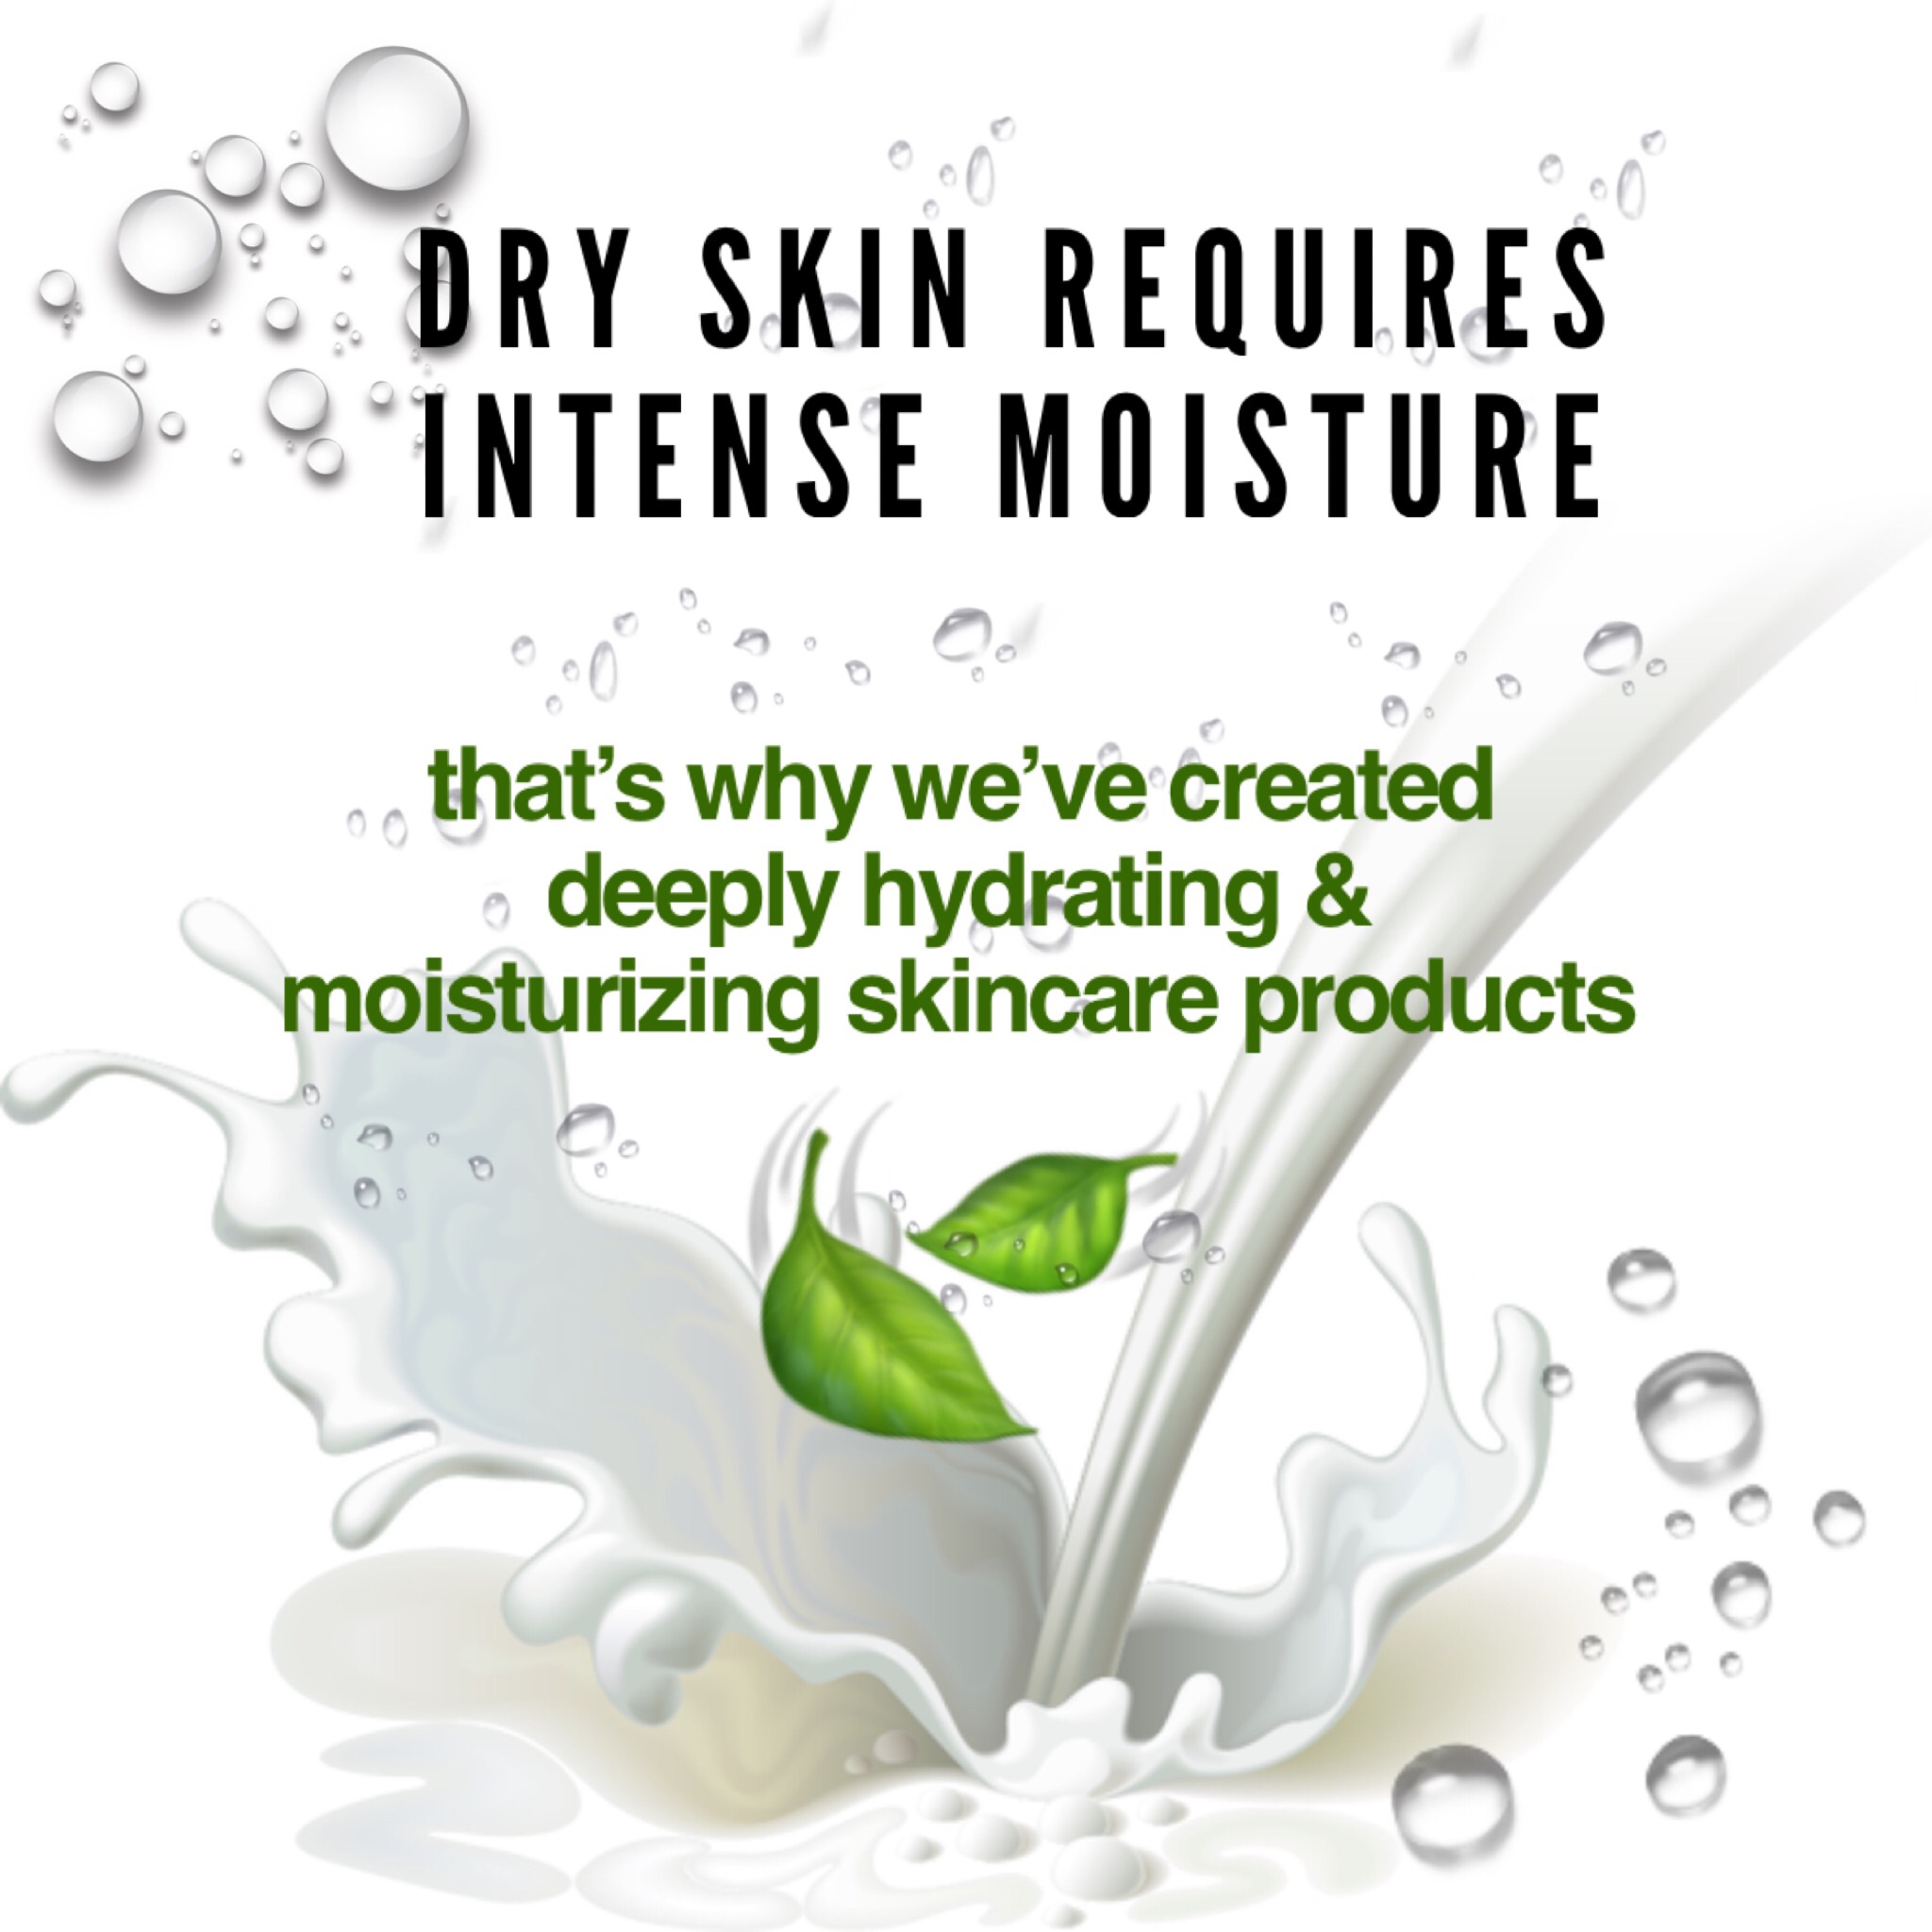 Our skincare products for dry skin